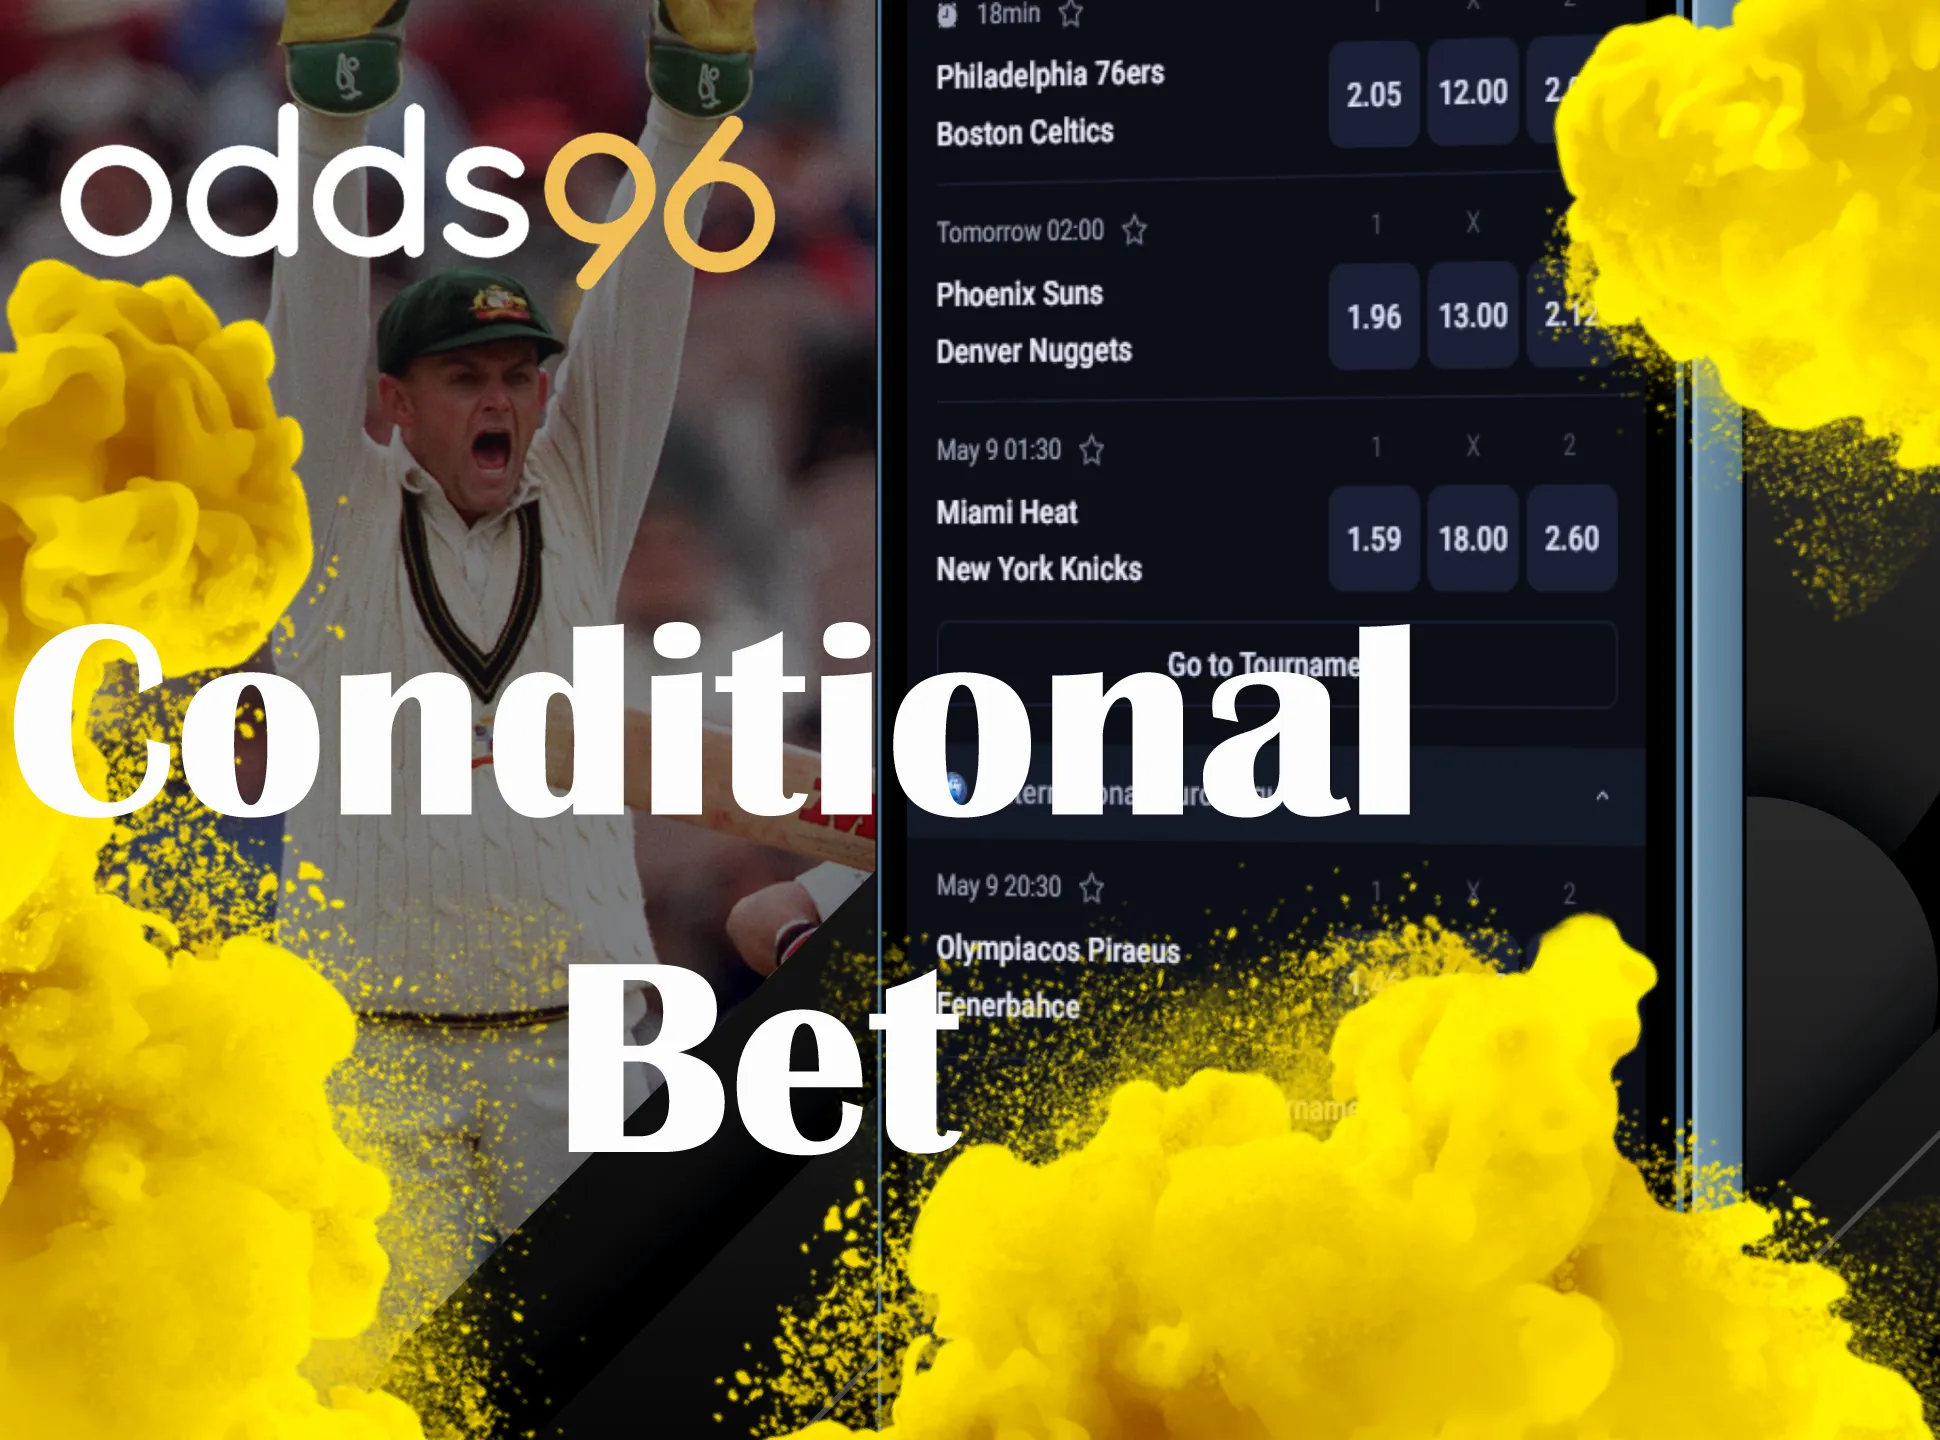 Bet on winning team and get your money at Odds96.